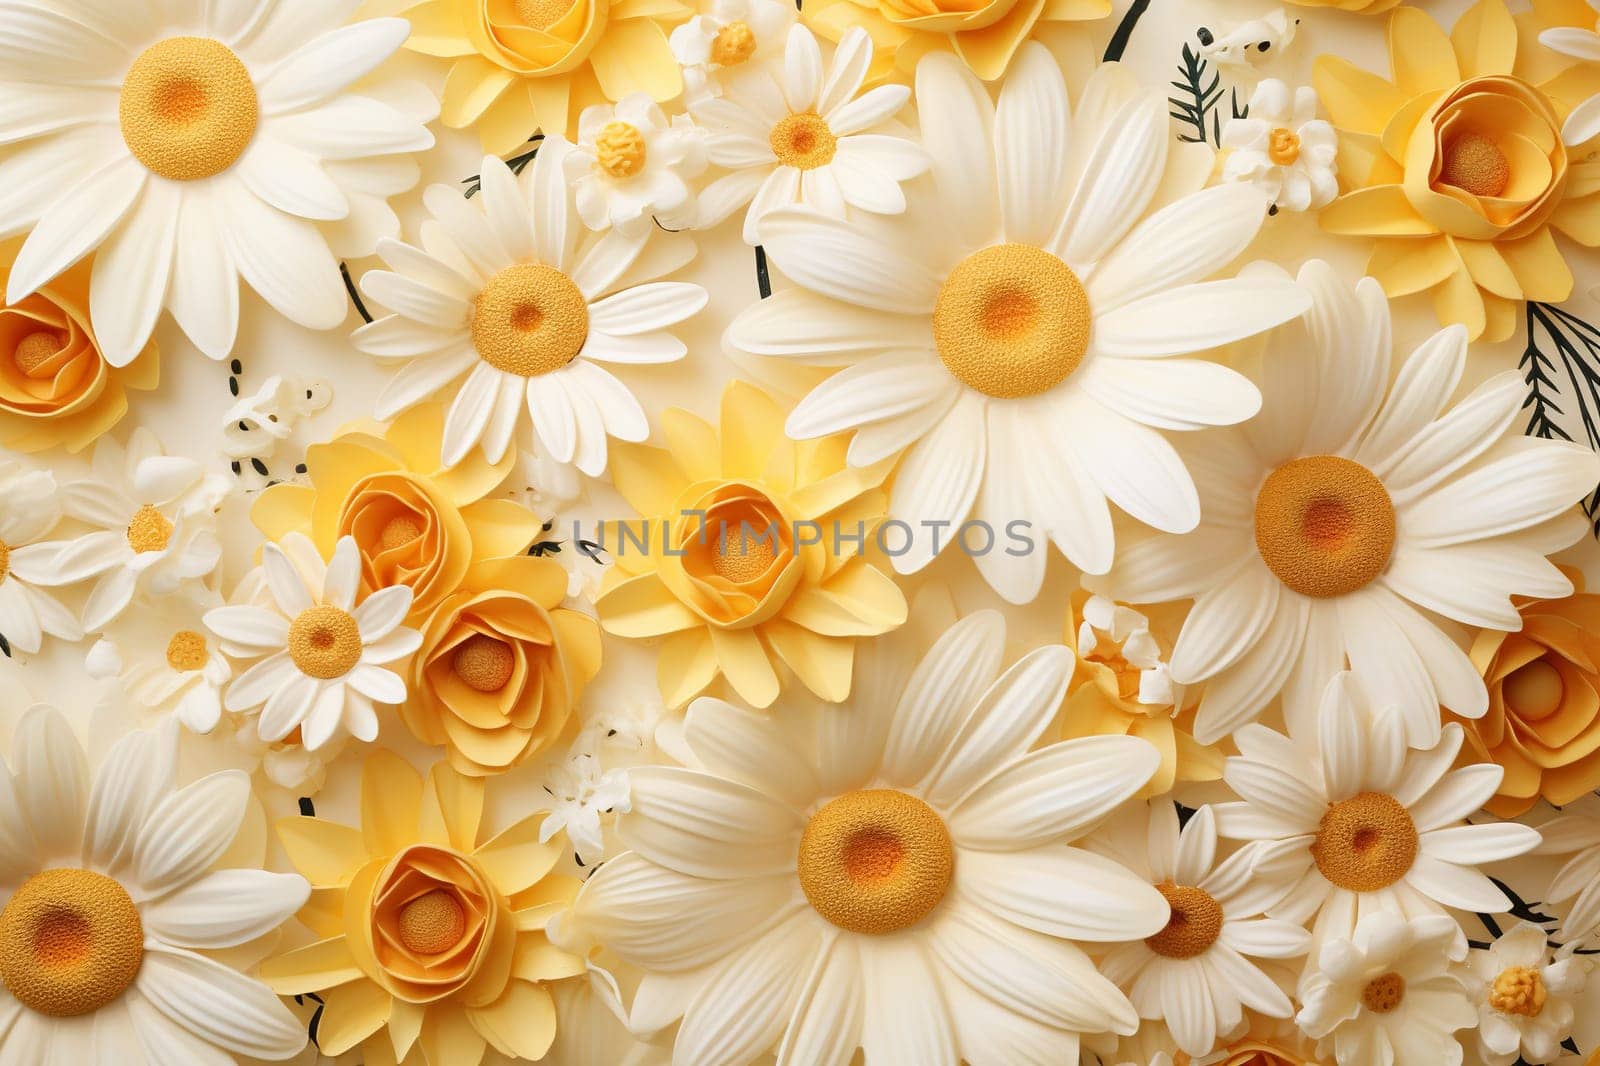 Background of white and yellow daisies cut out of paper.